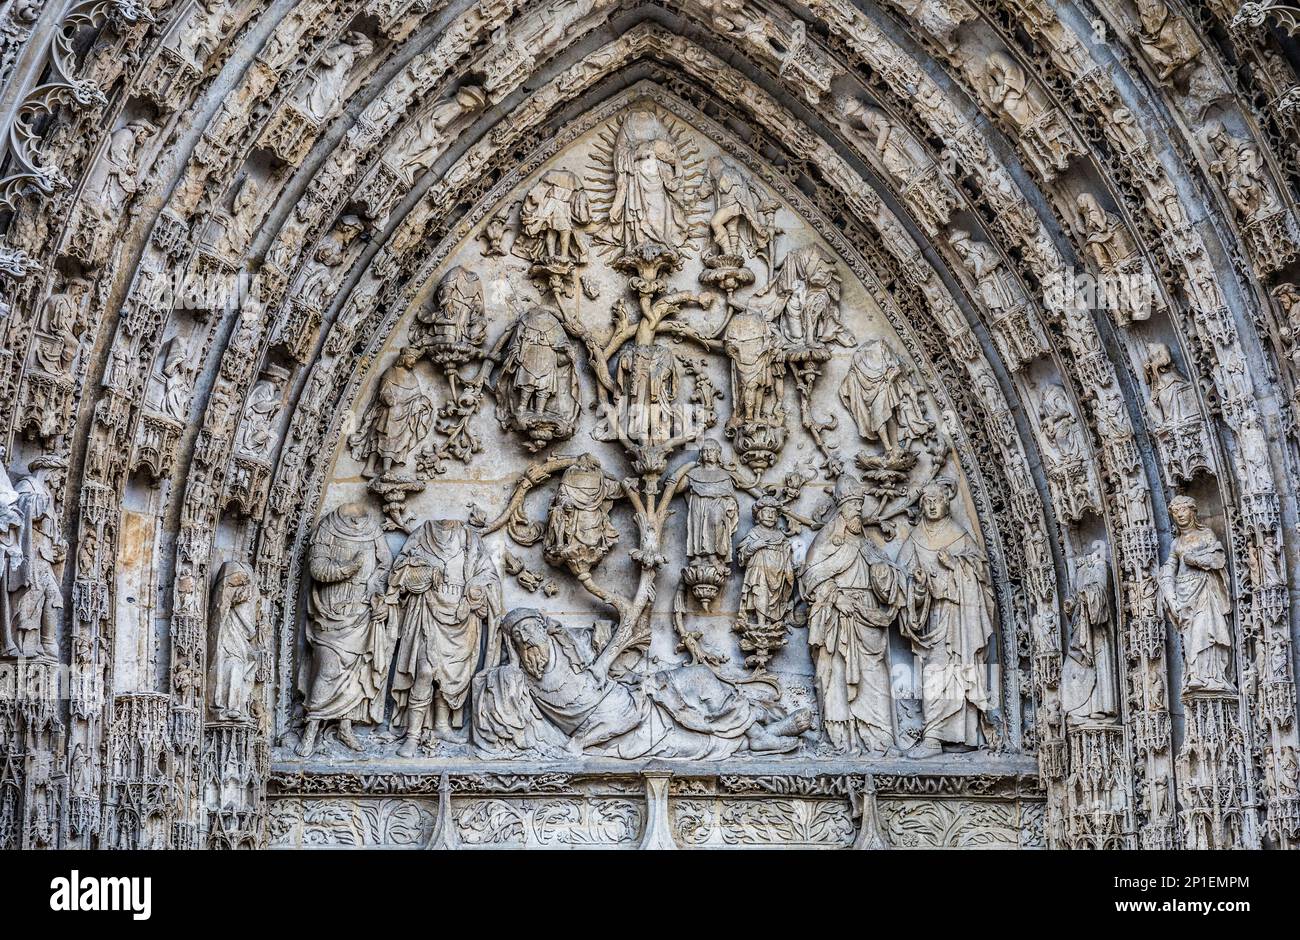 Tympanum of the central portal of Rouen Cathedral with sculpture galleries, Rouen, Normandy, France; Stock Photo